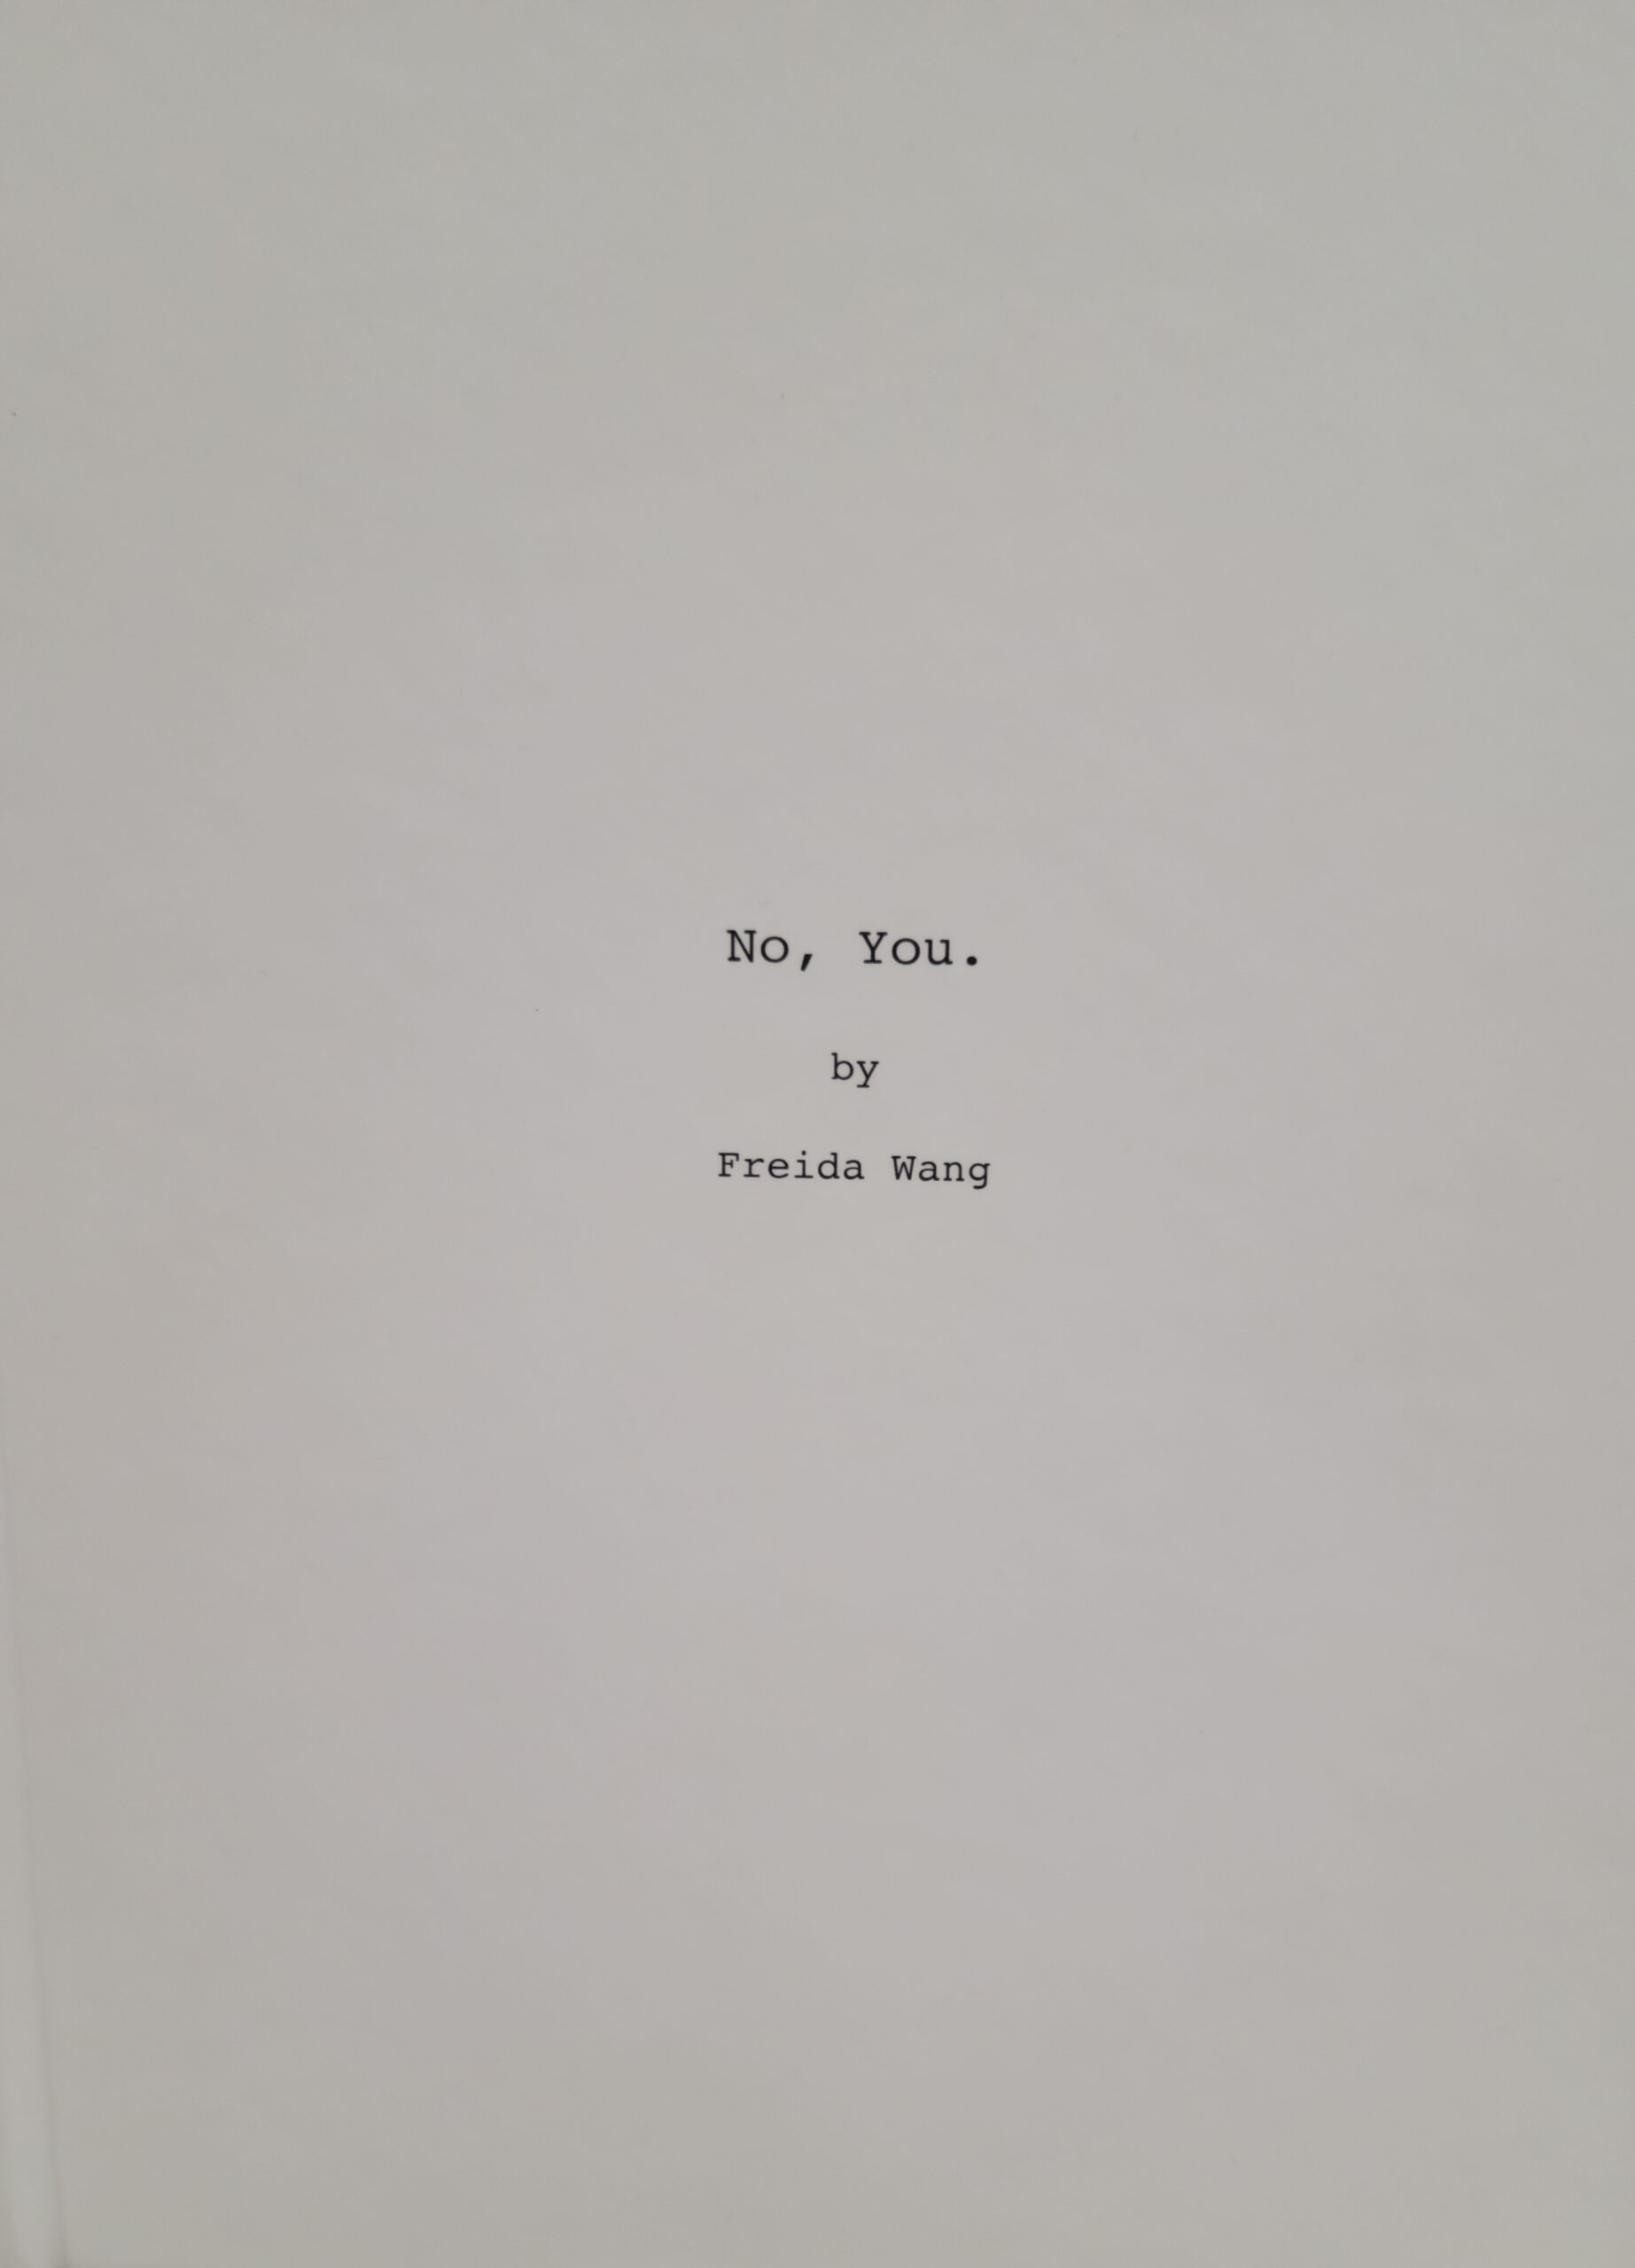 Photograph of front page of book No, You by Freida Wang